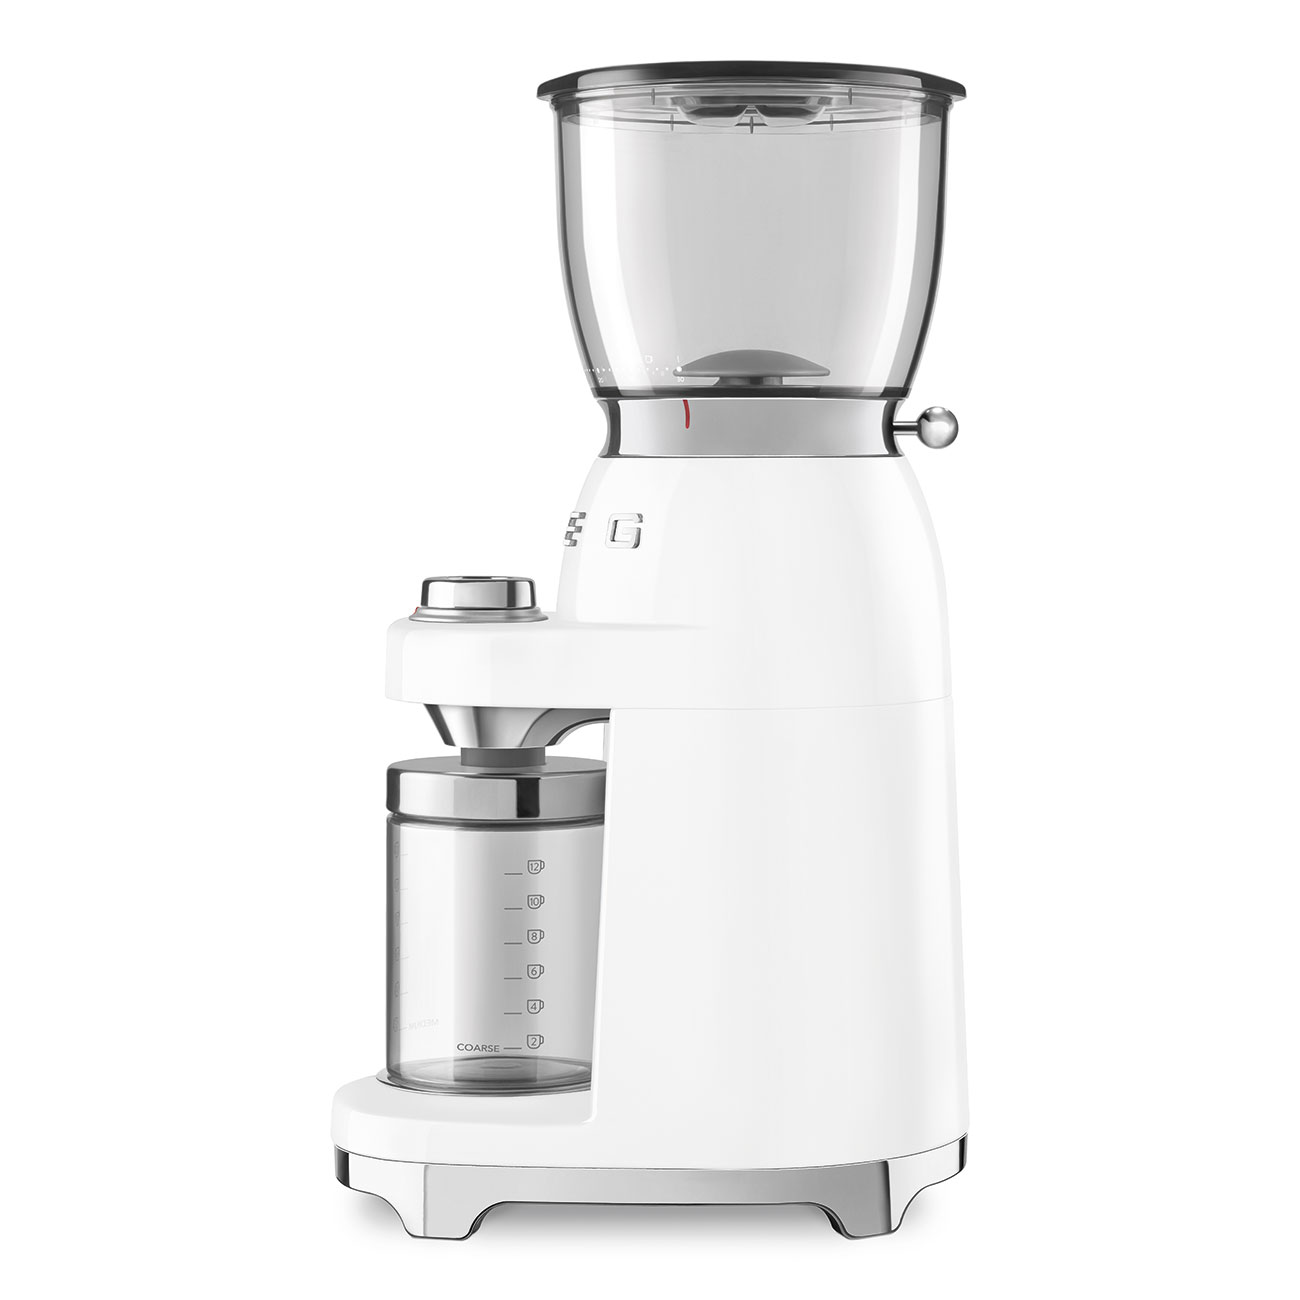 White Coffee Grinder featuring a conical burr - CGF01WHUK - Smeg_7